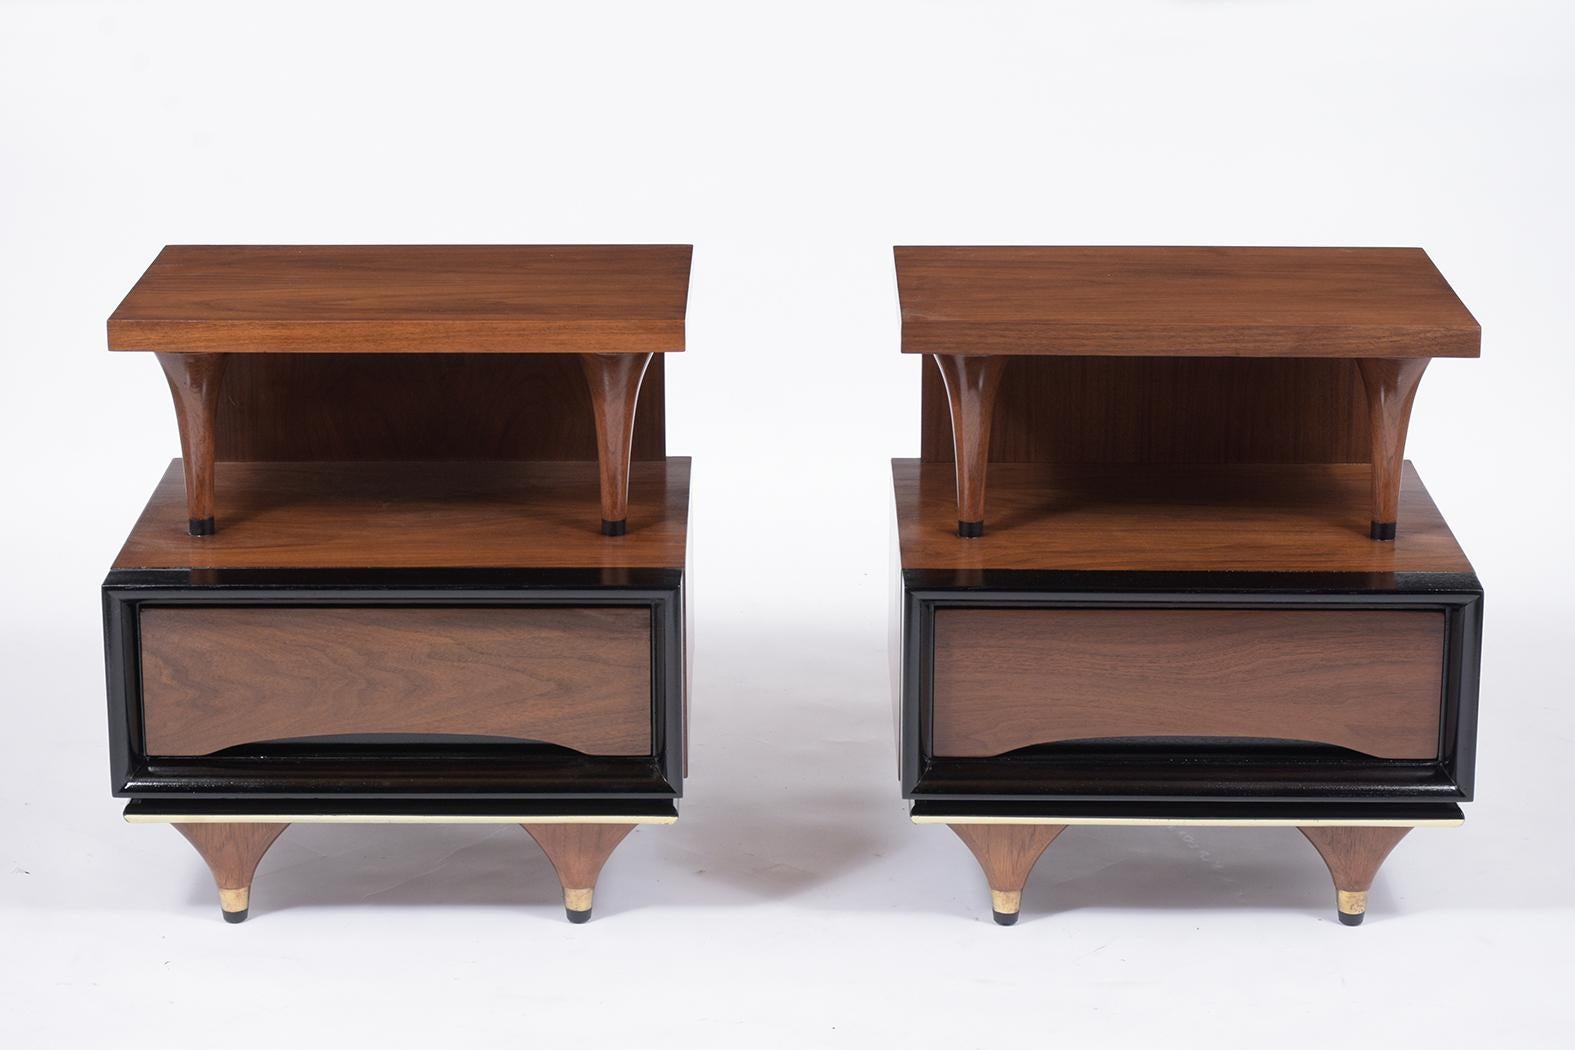 A pair of sleek Mid-Century Modern nightstands that have been fully restored, is handcrafted out of walnut wood and have a new rich walnut and ebonized combination color with a lacquer finish. These nightstands come with a small top open and open